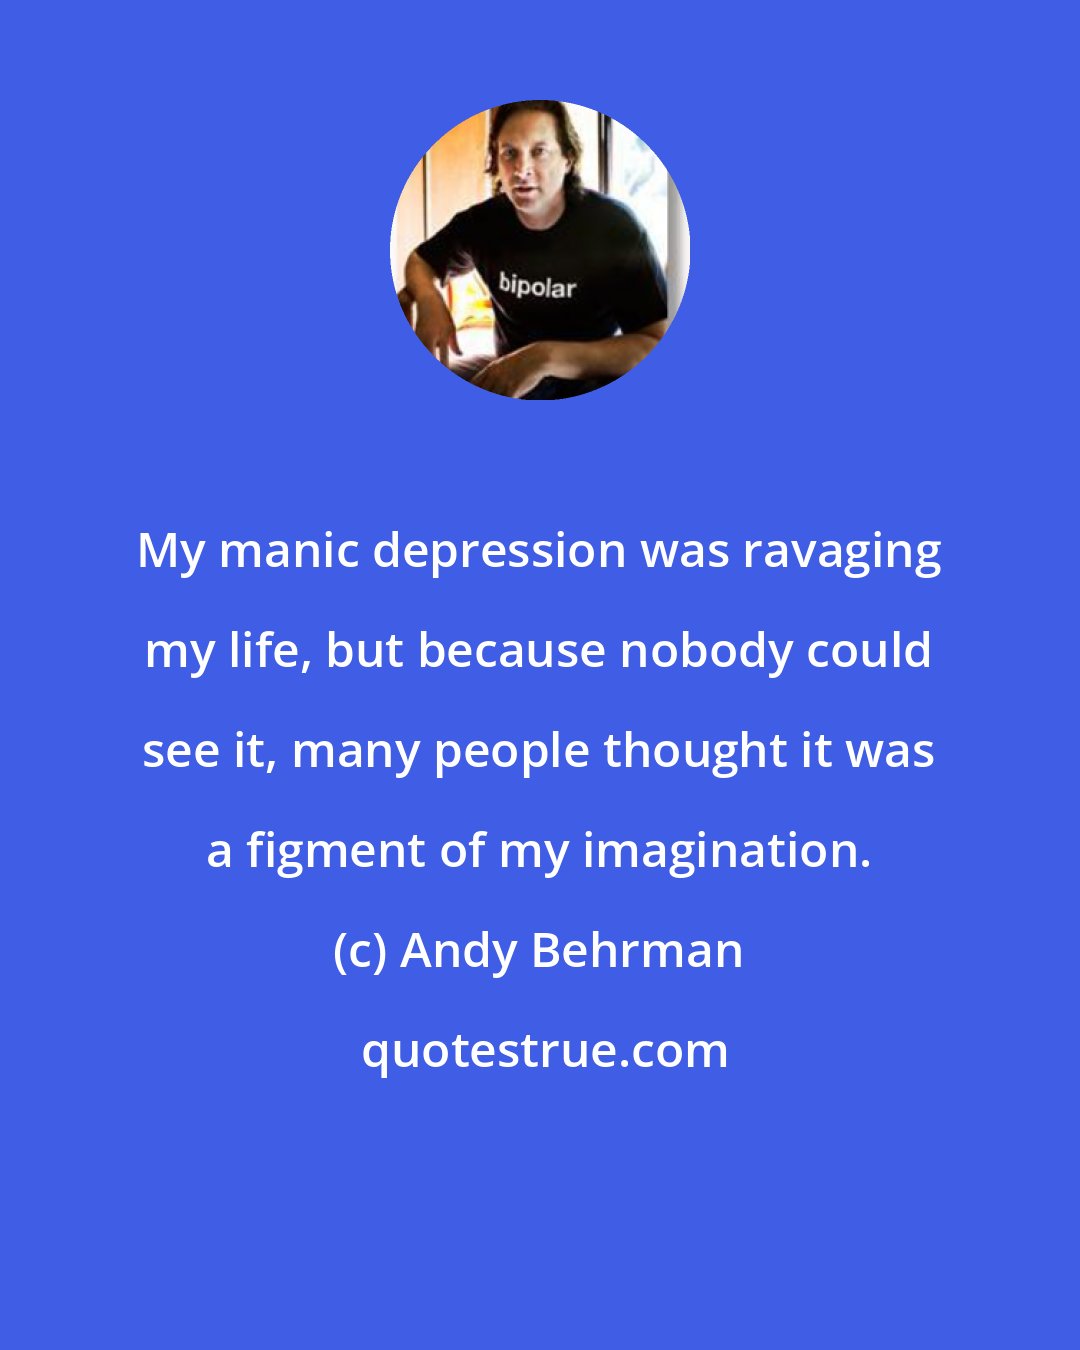 Andy Behrman: My manic depression was ravaging my life, but because nobody could see it, many people thought it was a figment of my imagination.